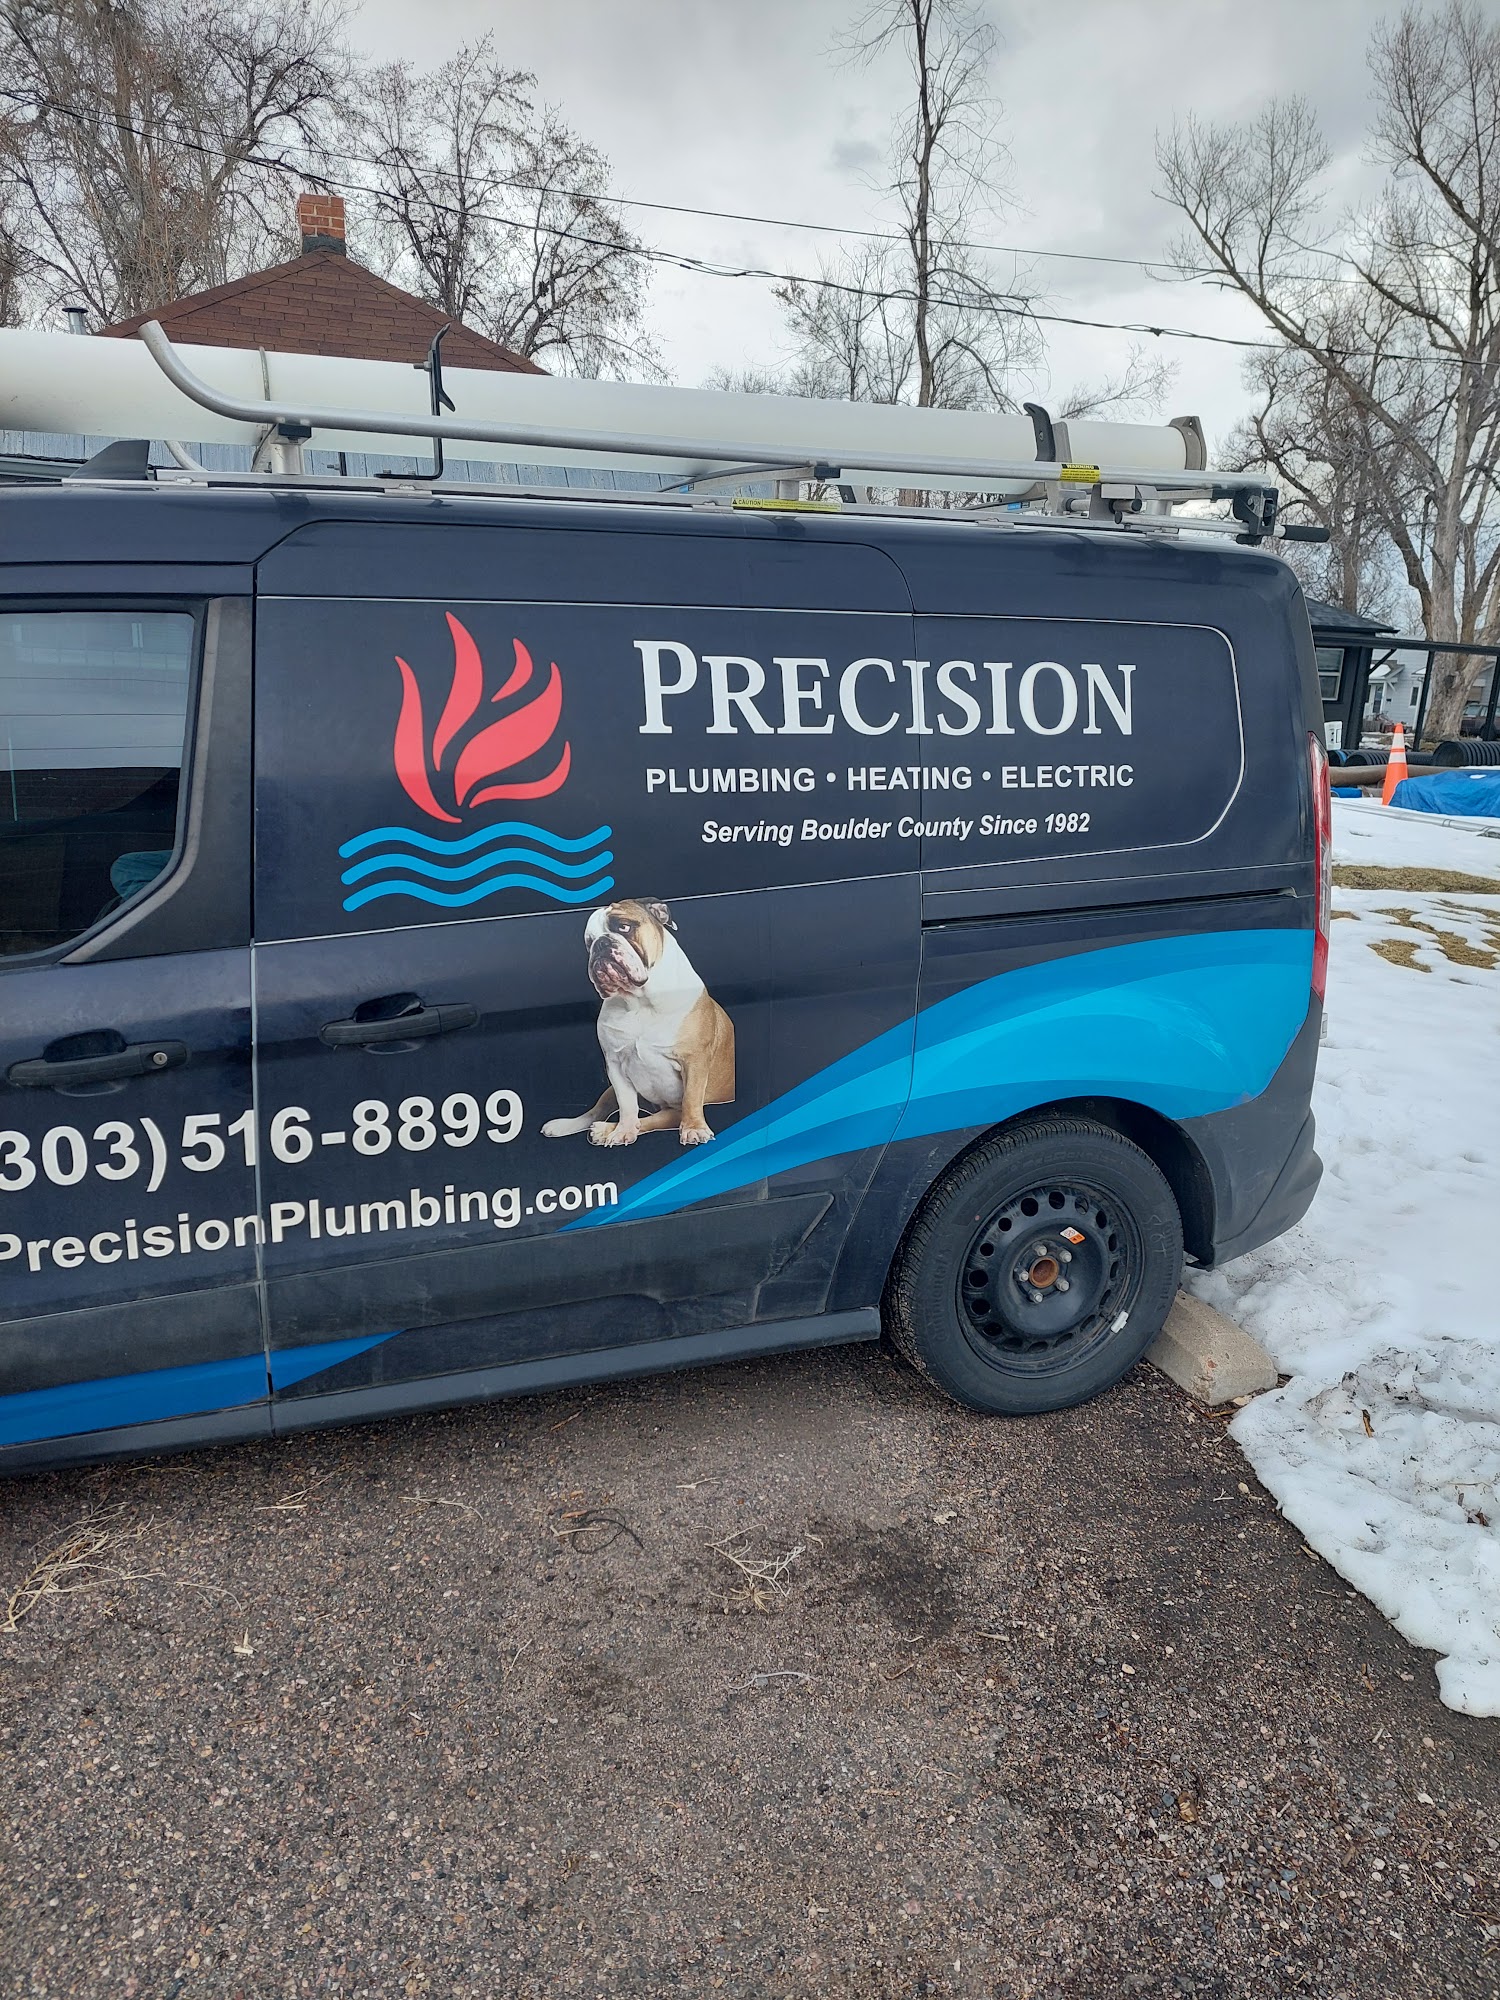 Precision Plumbing Heating Cooling & Electric